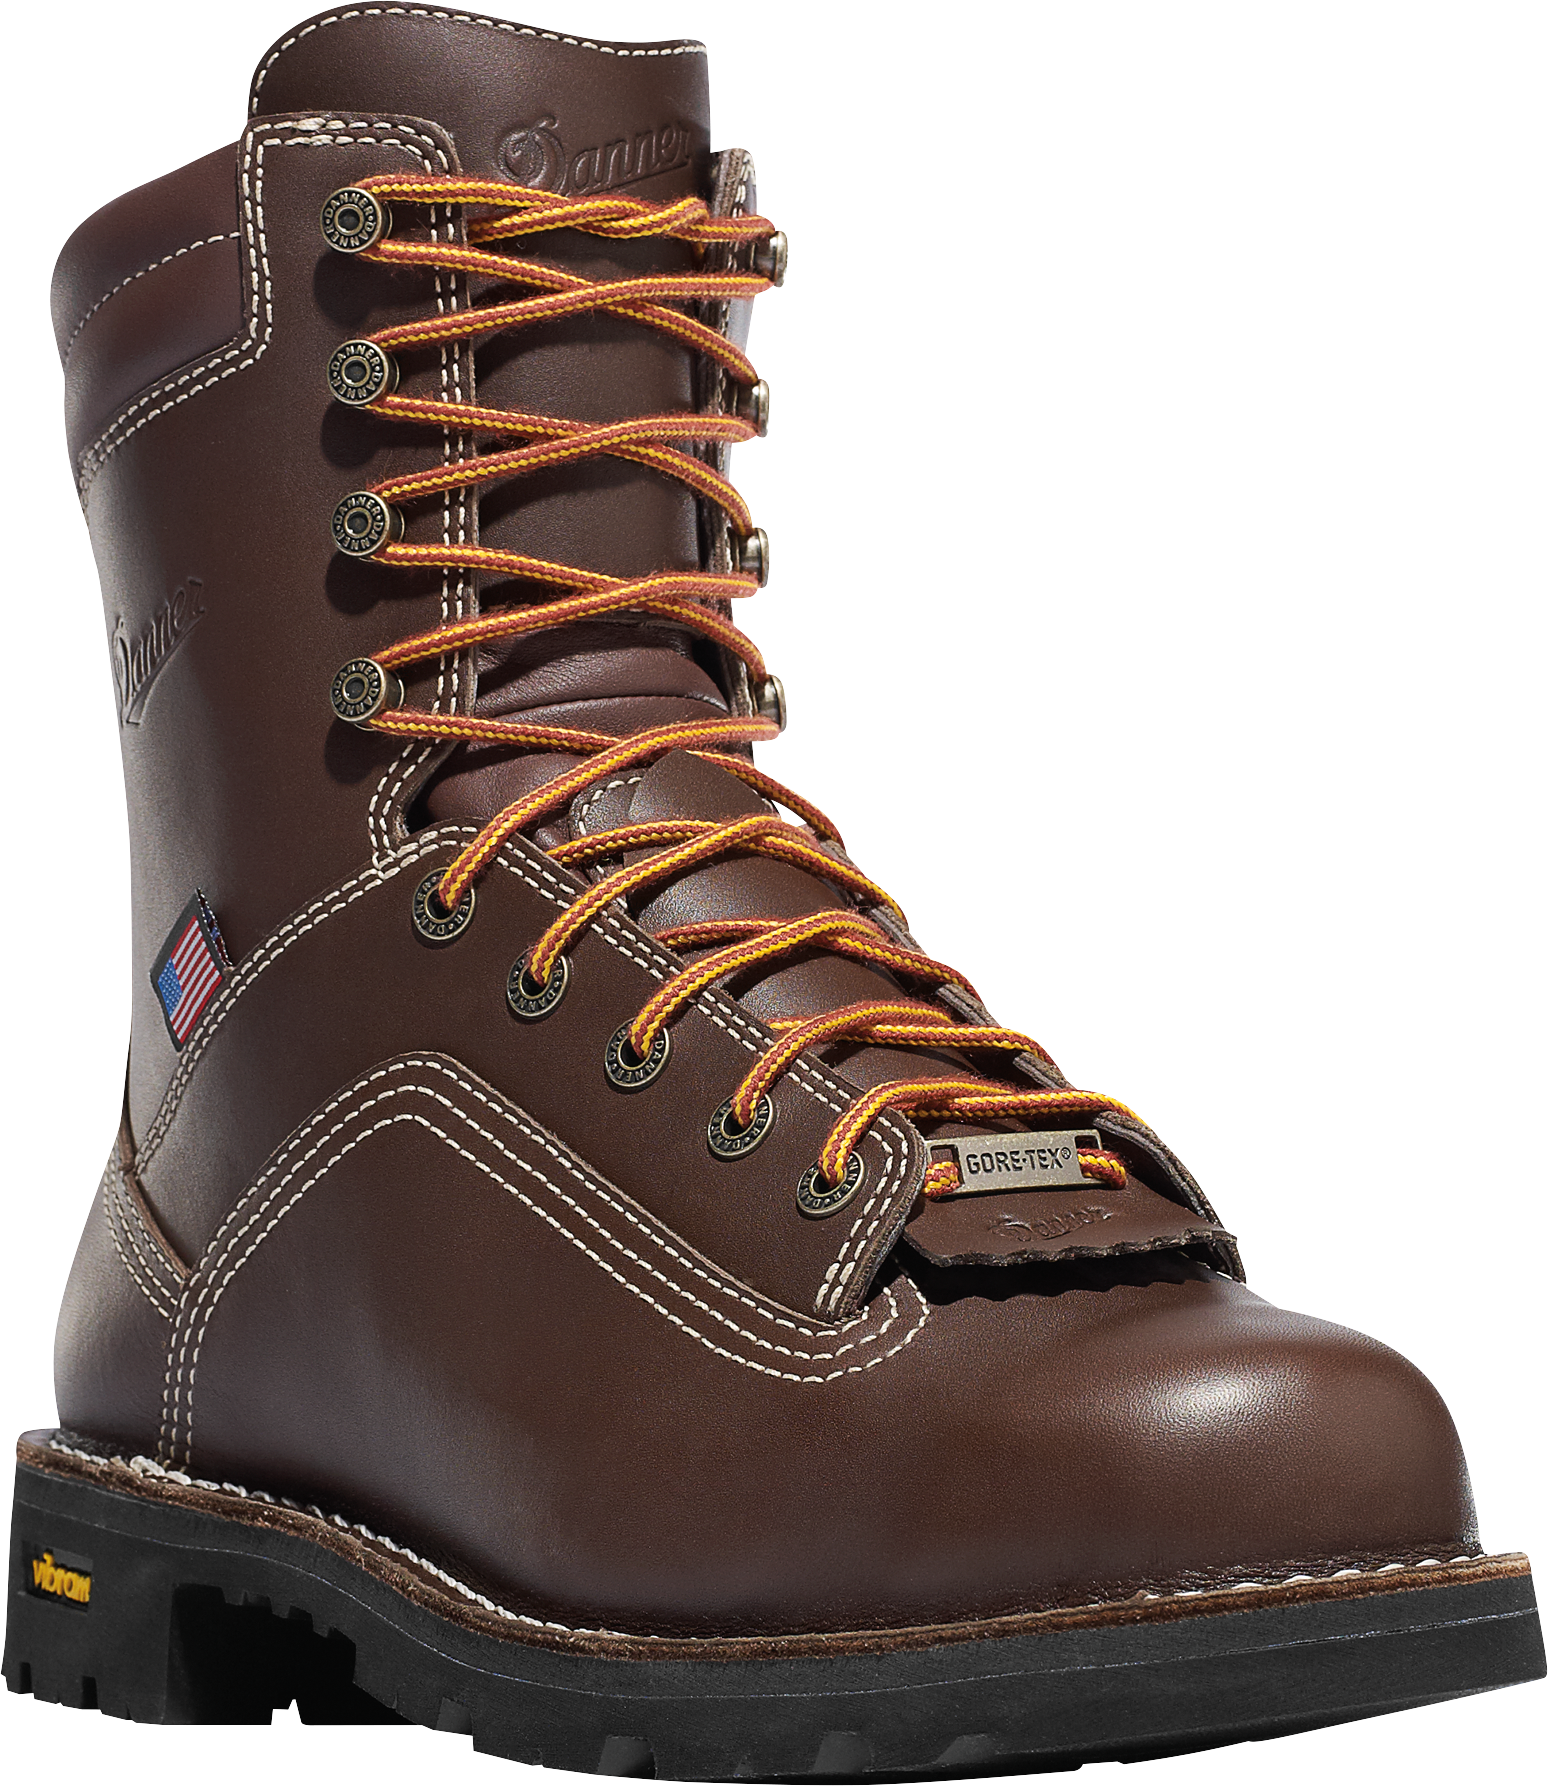 Danner Quarry USA Brown GORE-TEX Alloy Toe Work Boots for Men - Brown - 10W